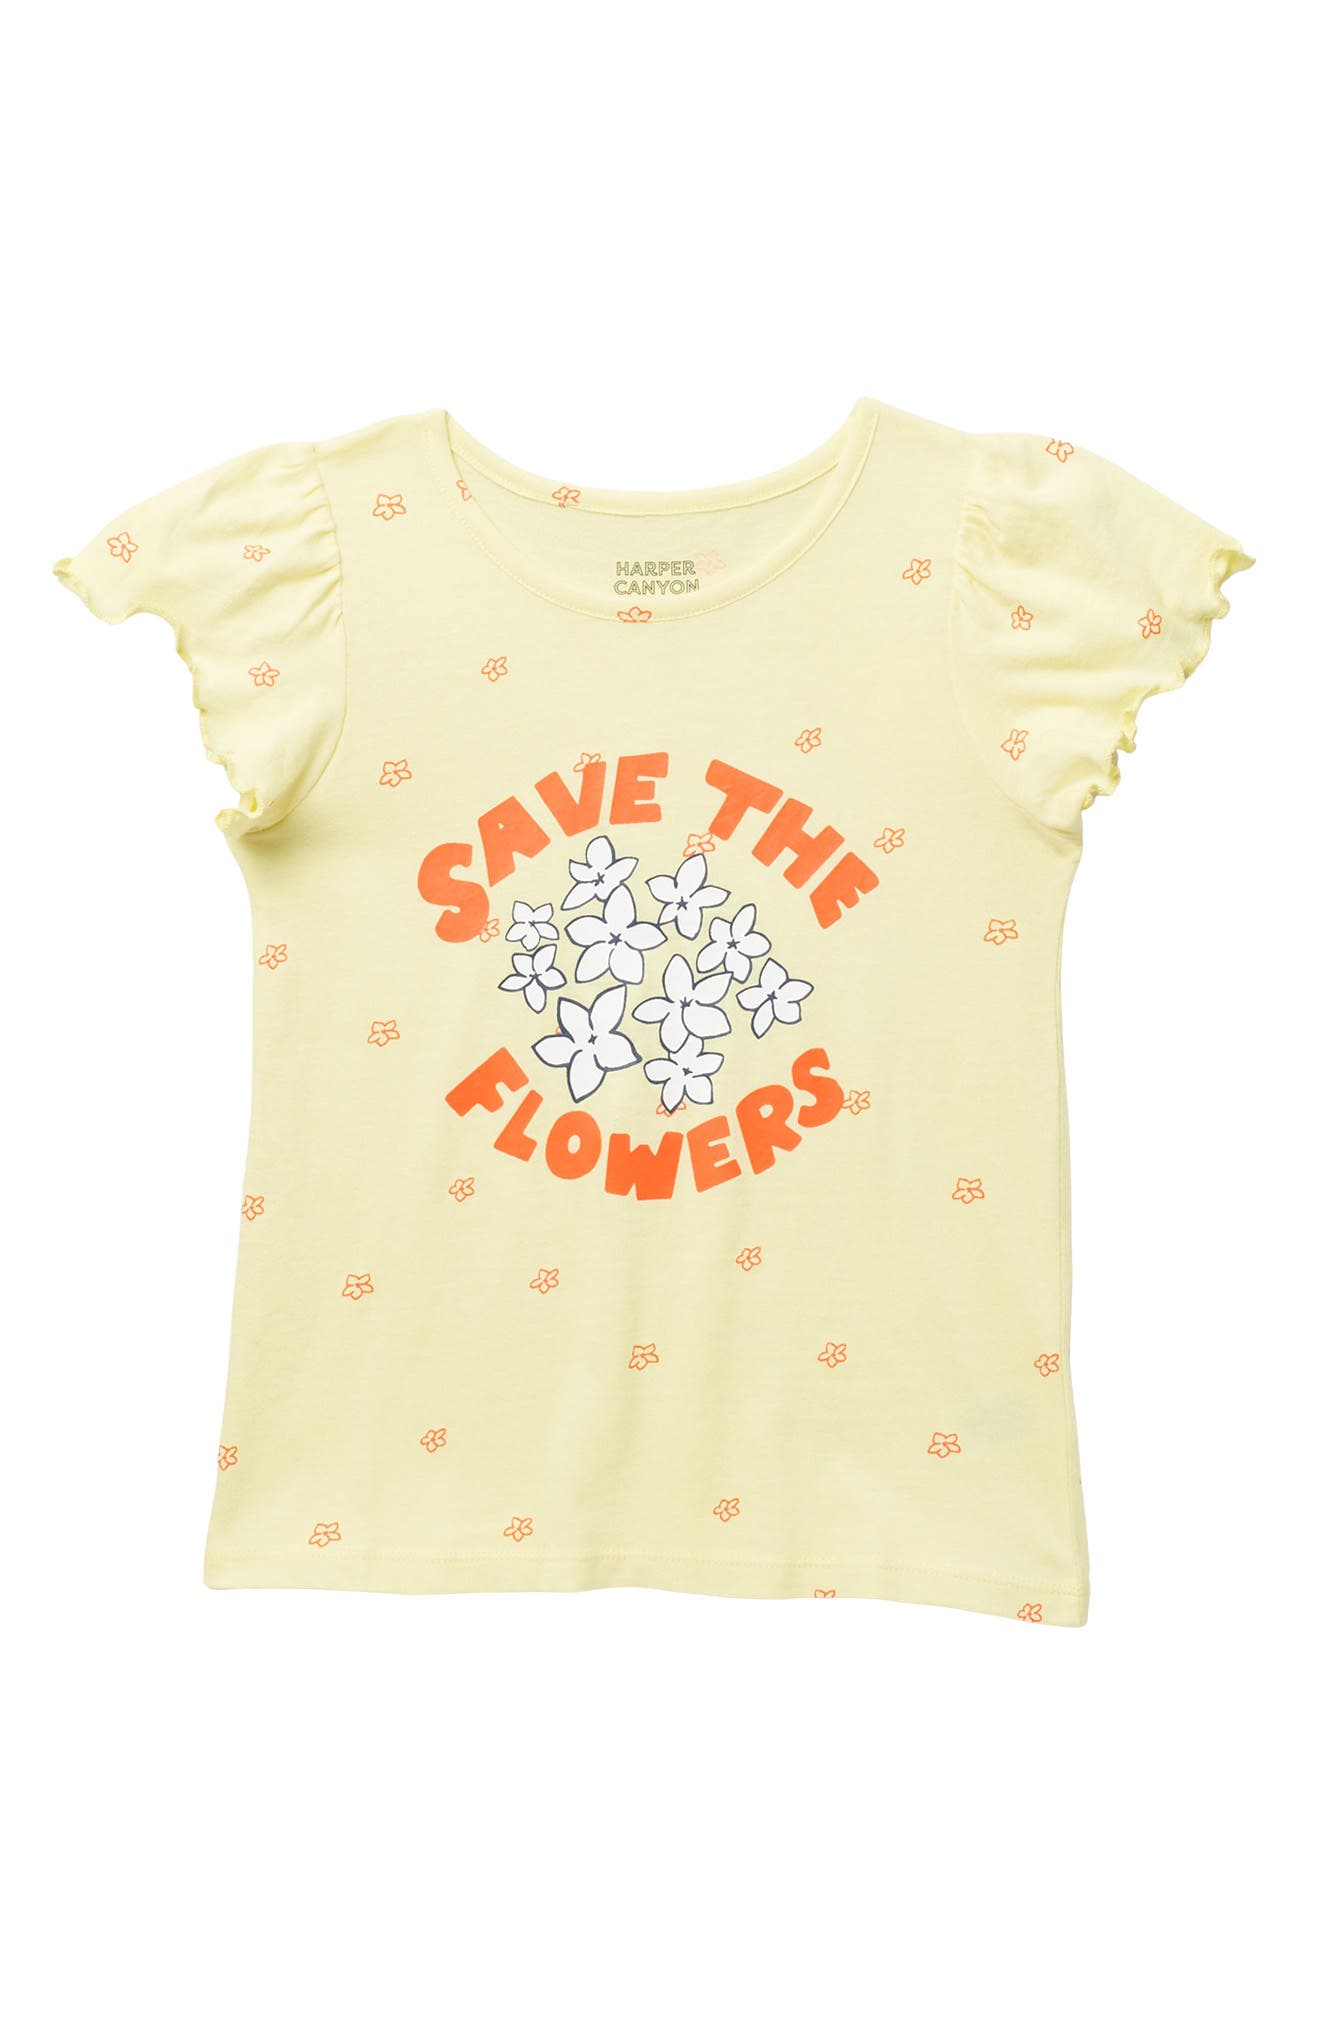 Harper Canyon Kids' Graphic T-shirt In Yellow Save The Flowers